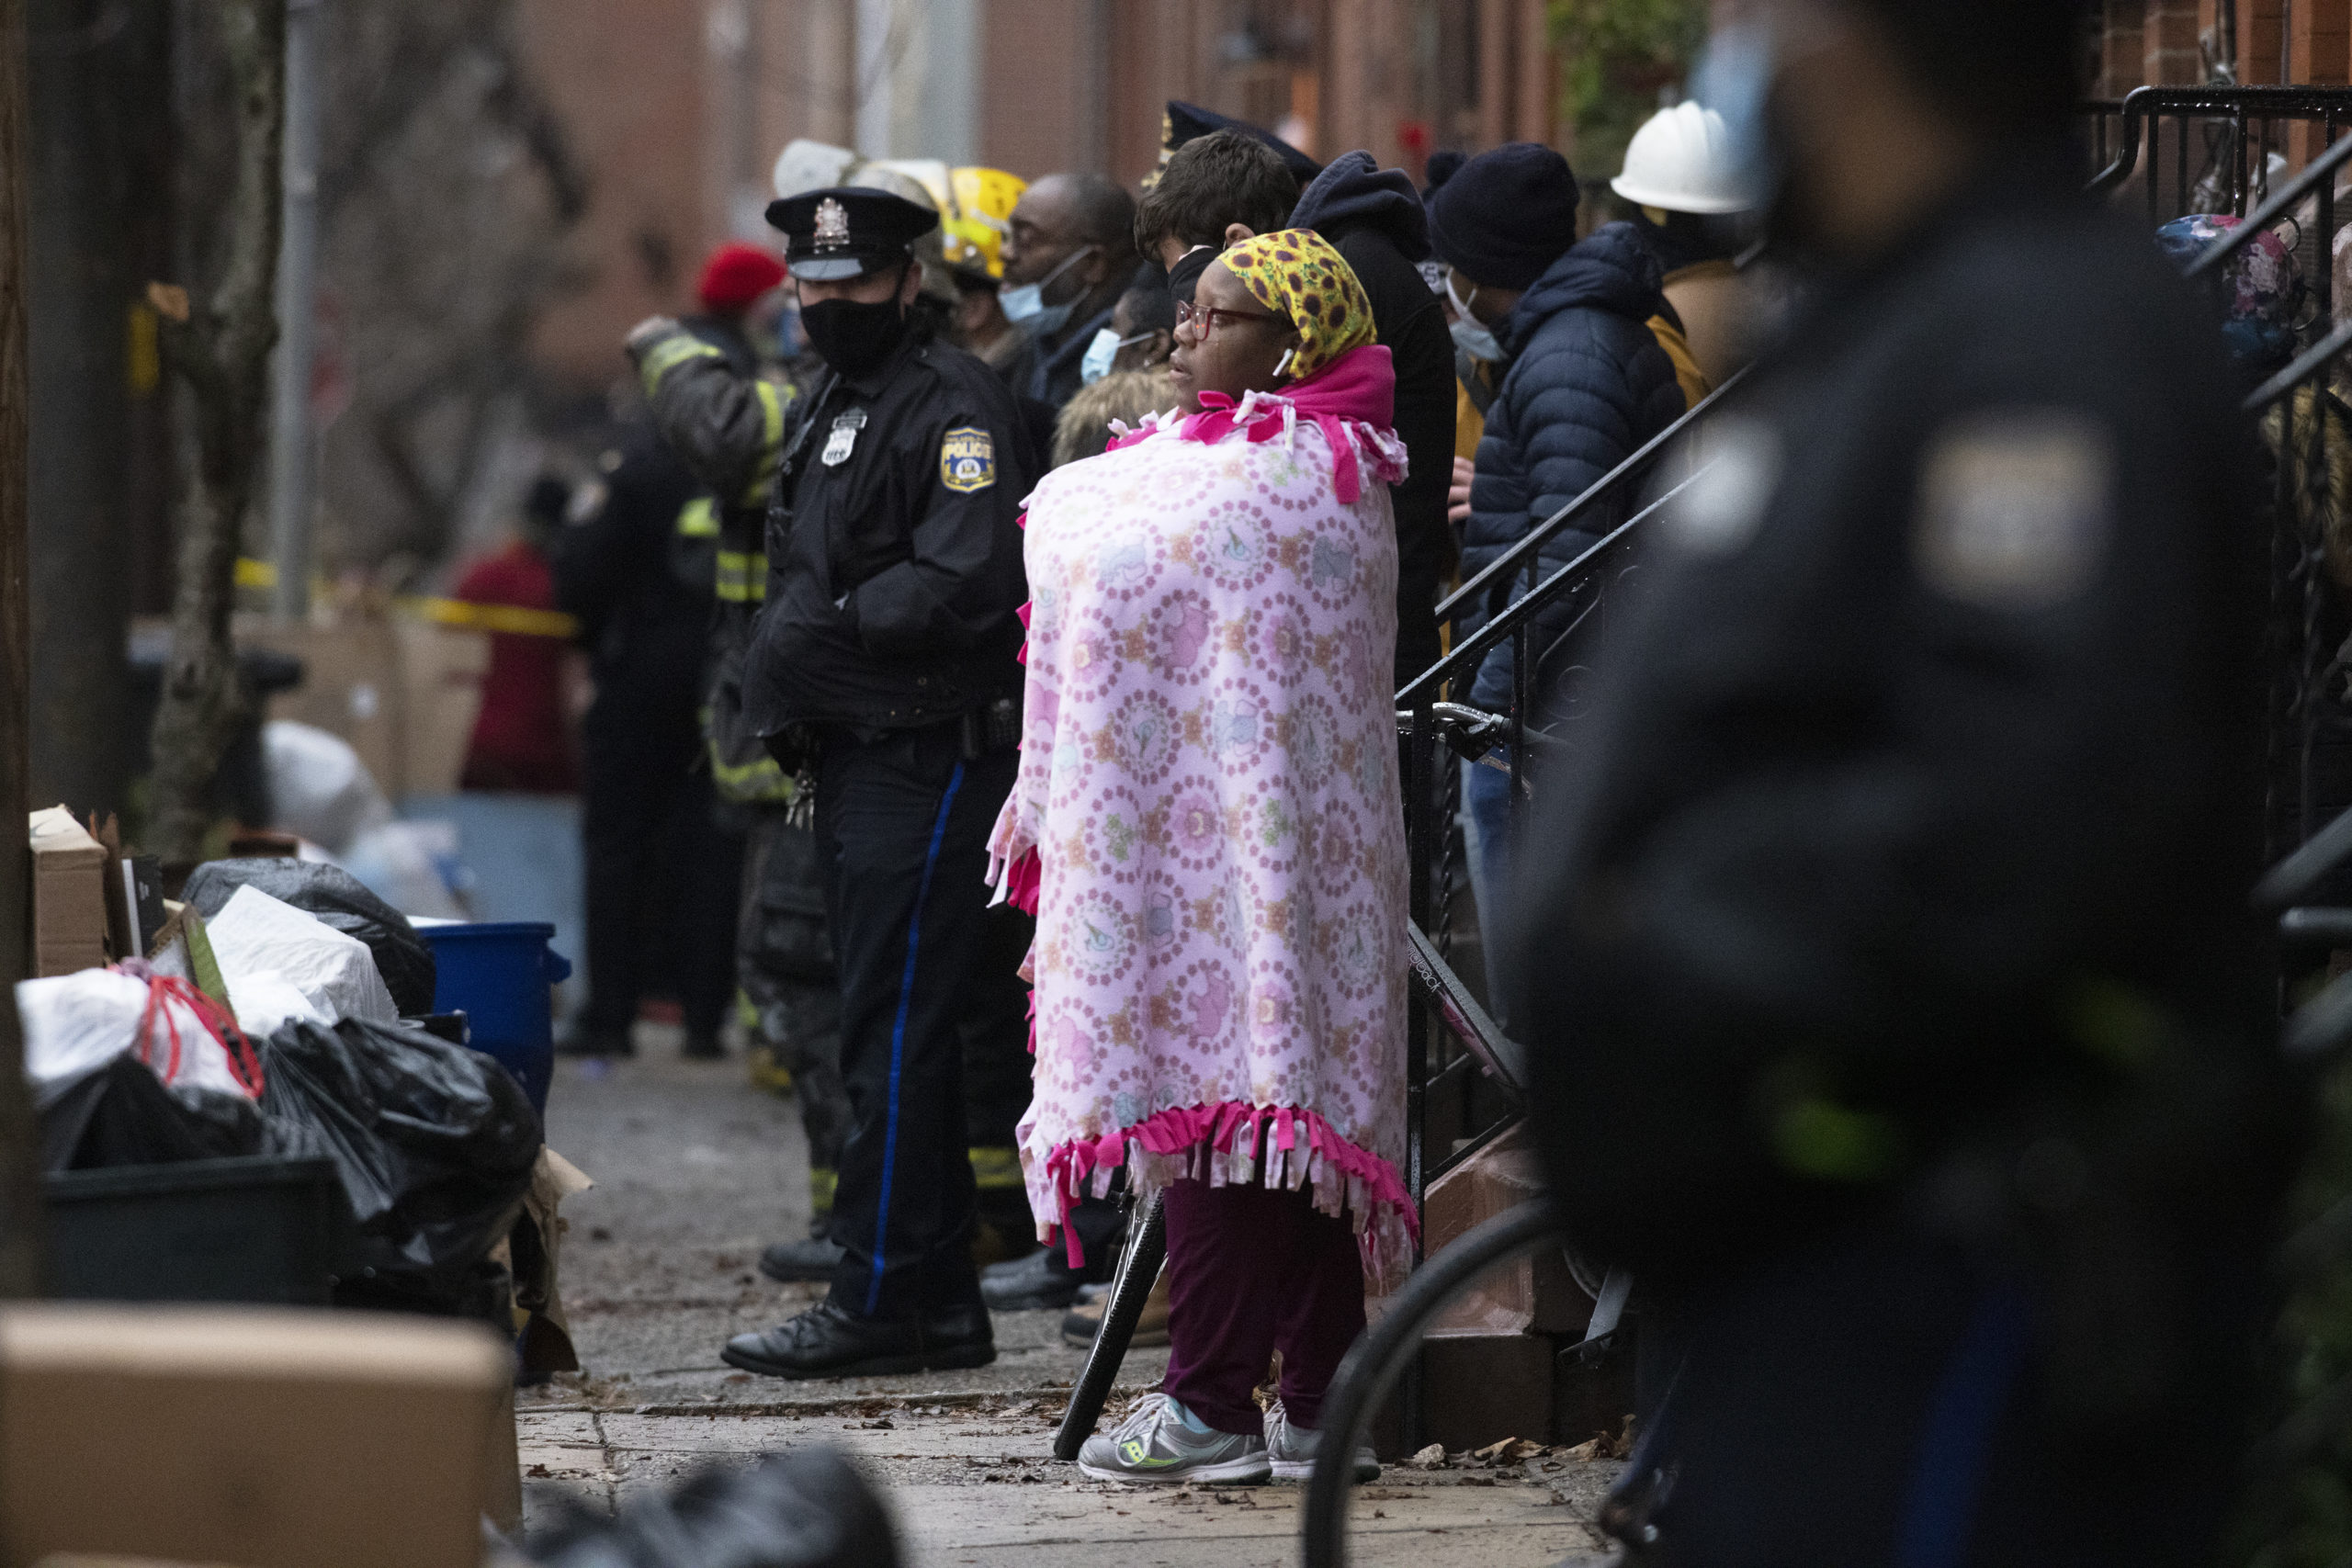 Bystanders watch as the Philadelphia fire department works at the scene of a deadly row house fire in Philadelphia Wednesday.